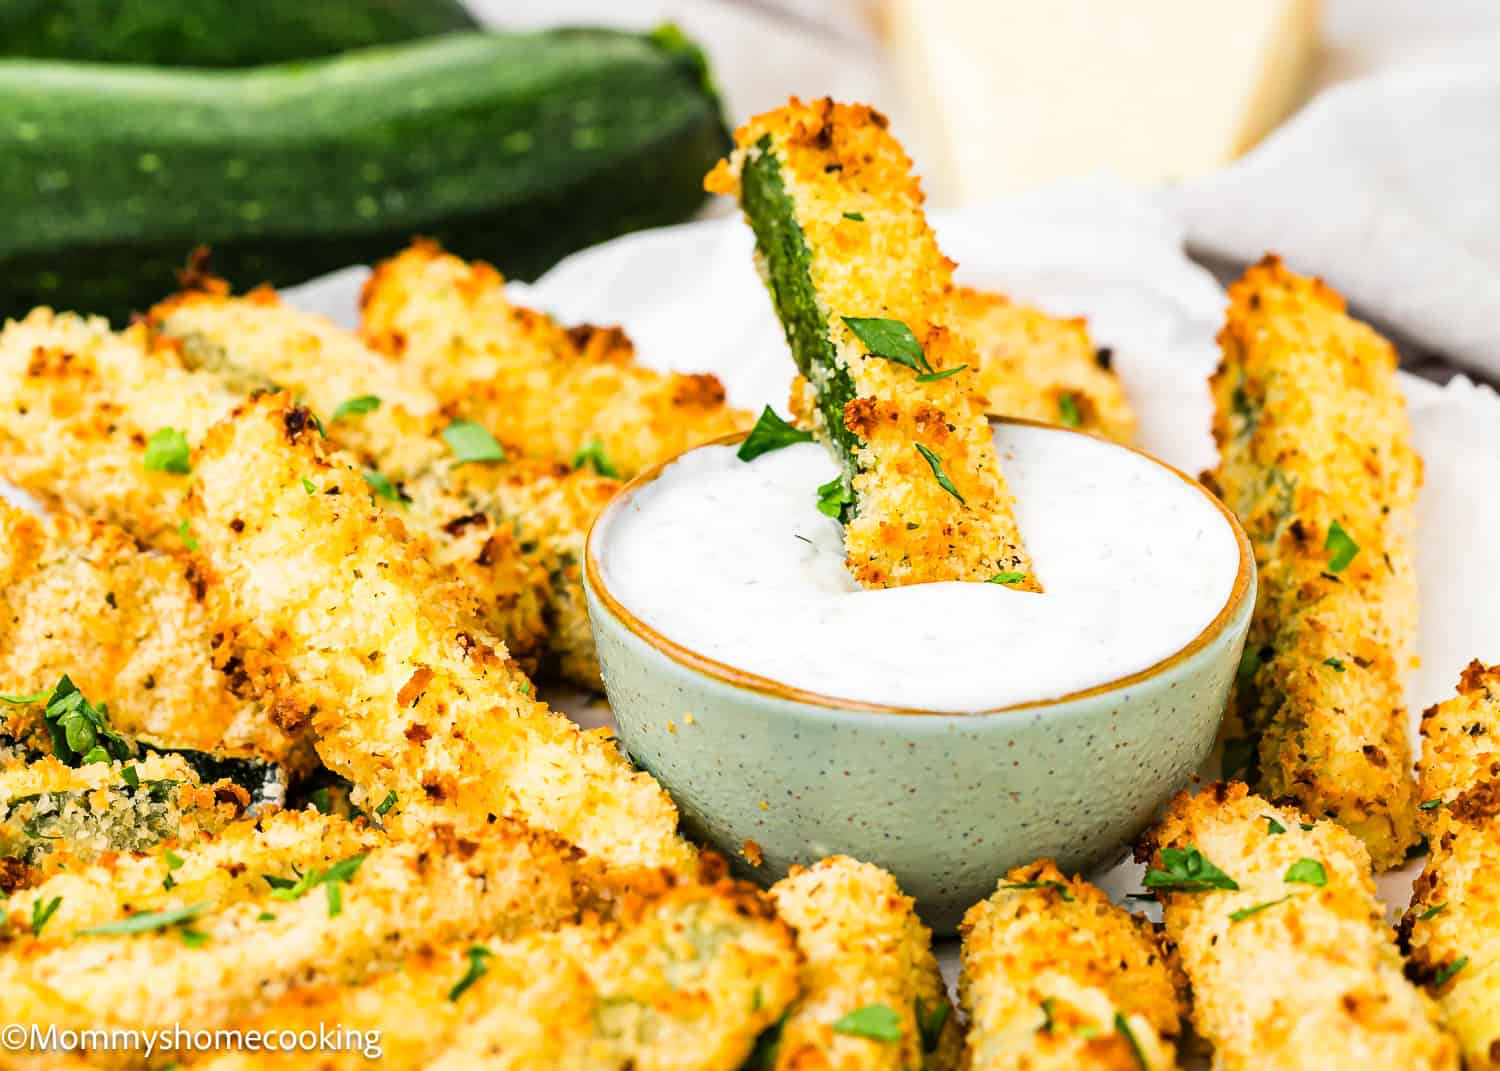 a Eggless Zucchini Frie dipped in a bowl with yogurt sauce.